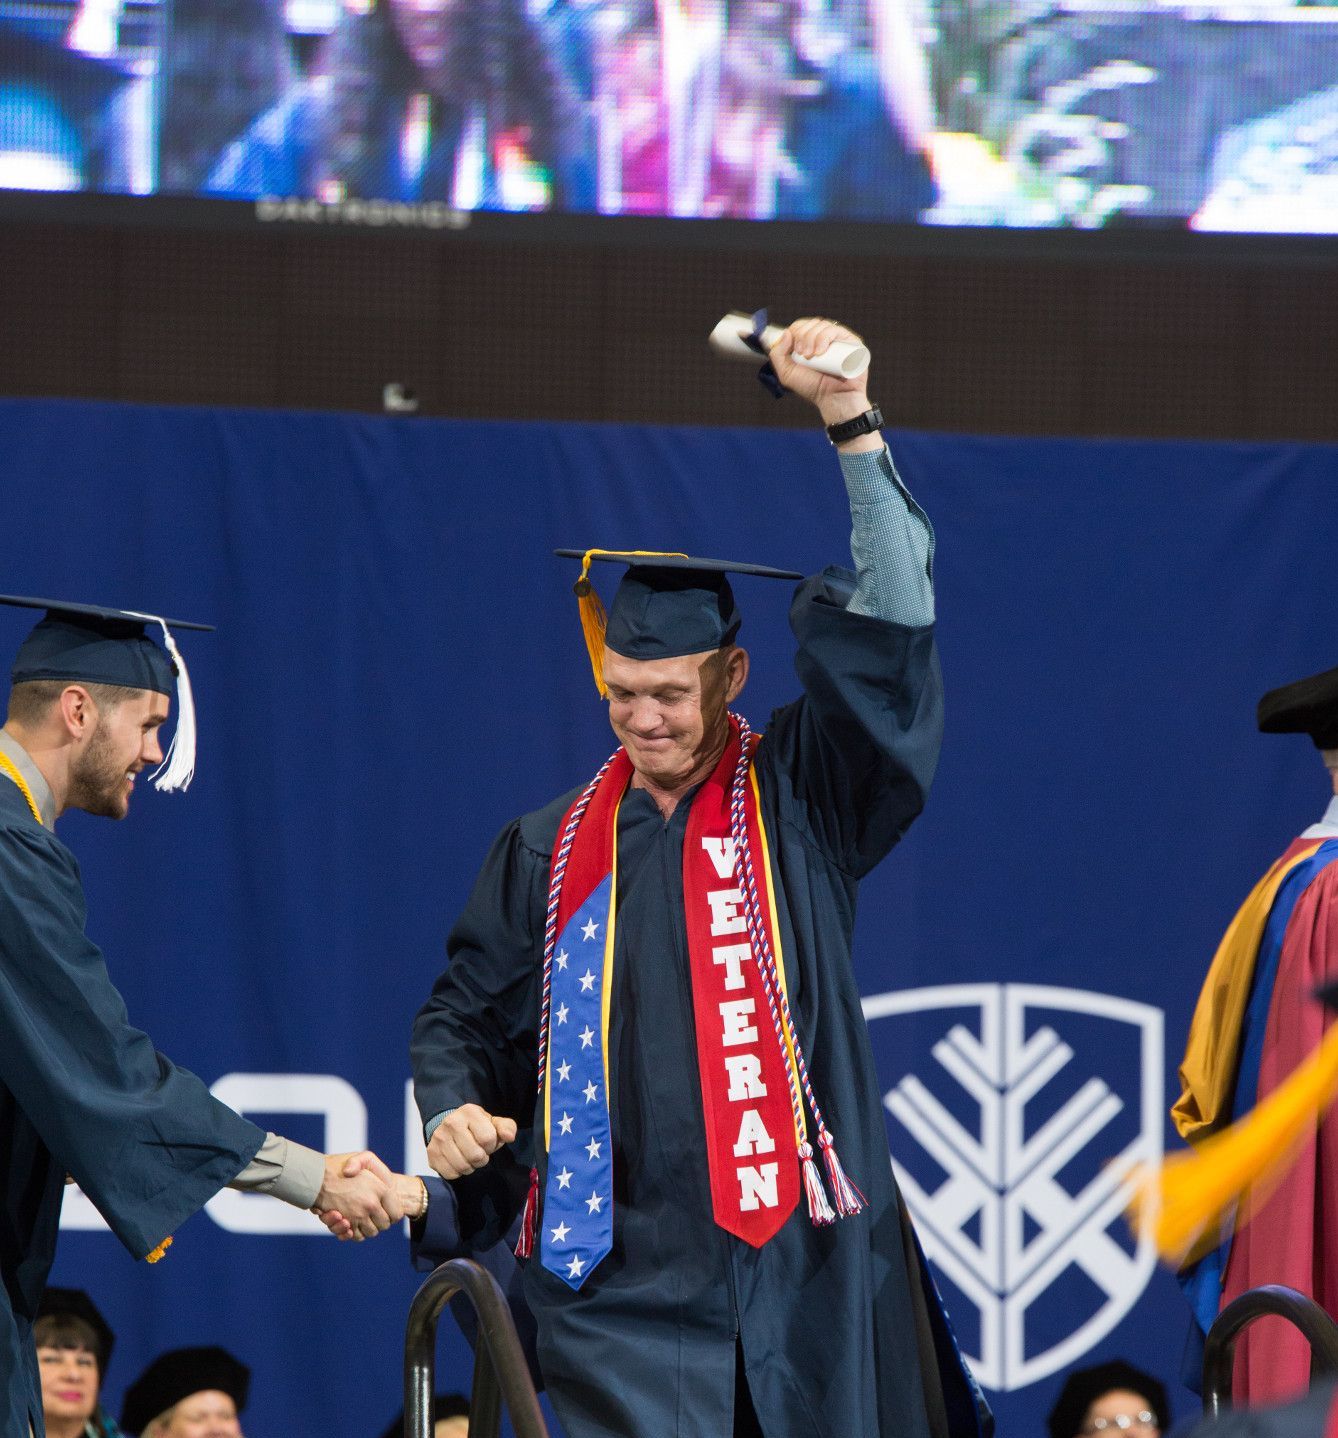 An NAU veteran graduates and holds his arm up in victory.